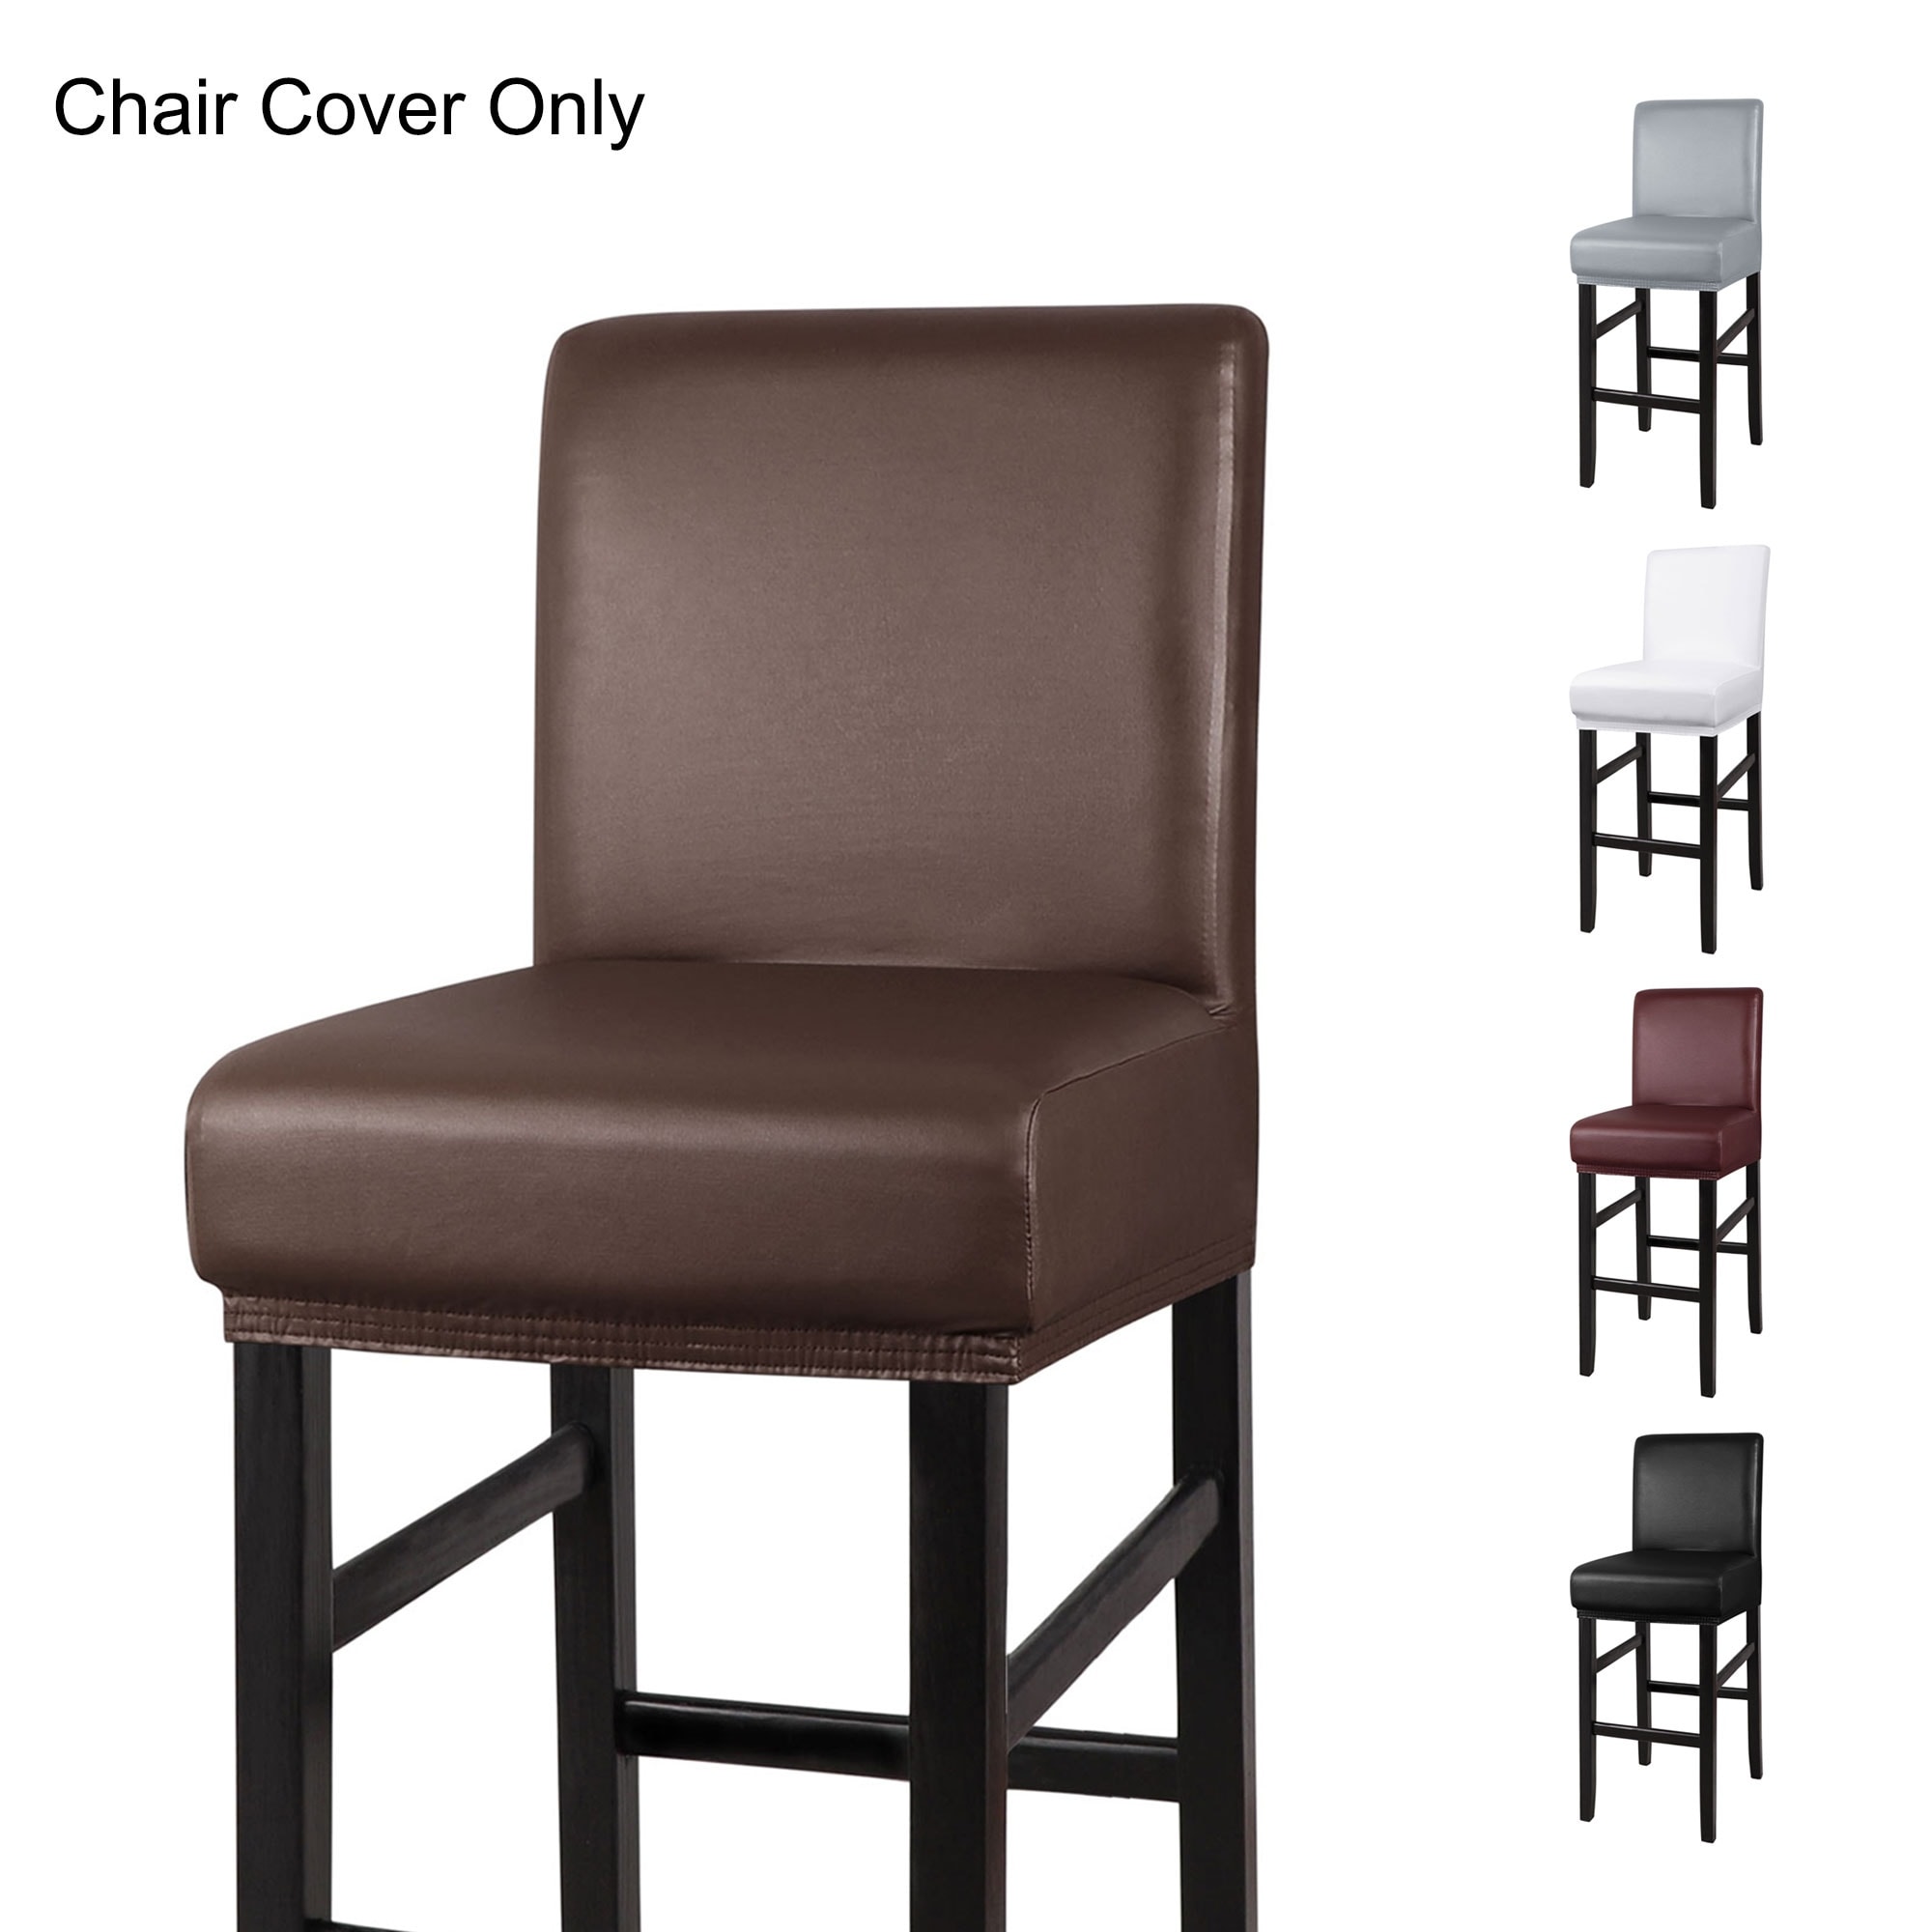 https://ak1.ostkcdn.com/images/products/is/images/direct/16e735f2100651b79f773651fe0a005a45020635/Waterproof-Bar-Stool-Covers-for-Counter-Short-Back-Chair-Covers.jpg